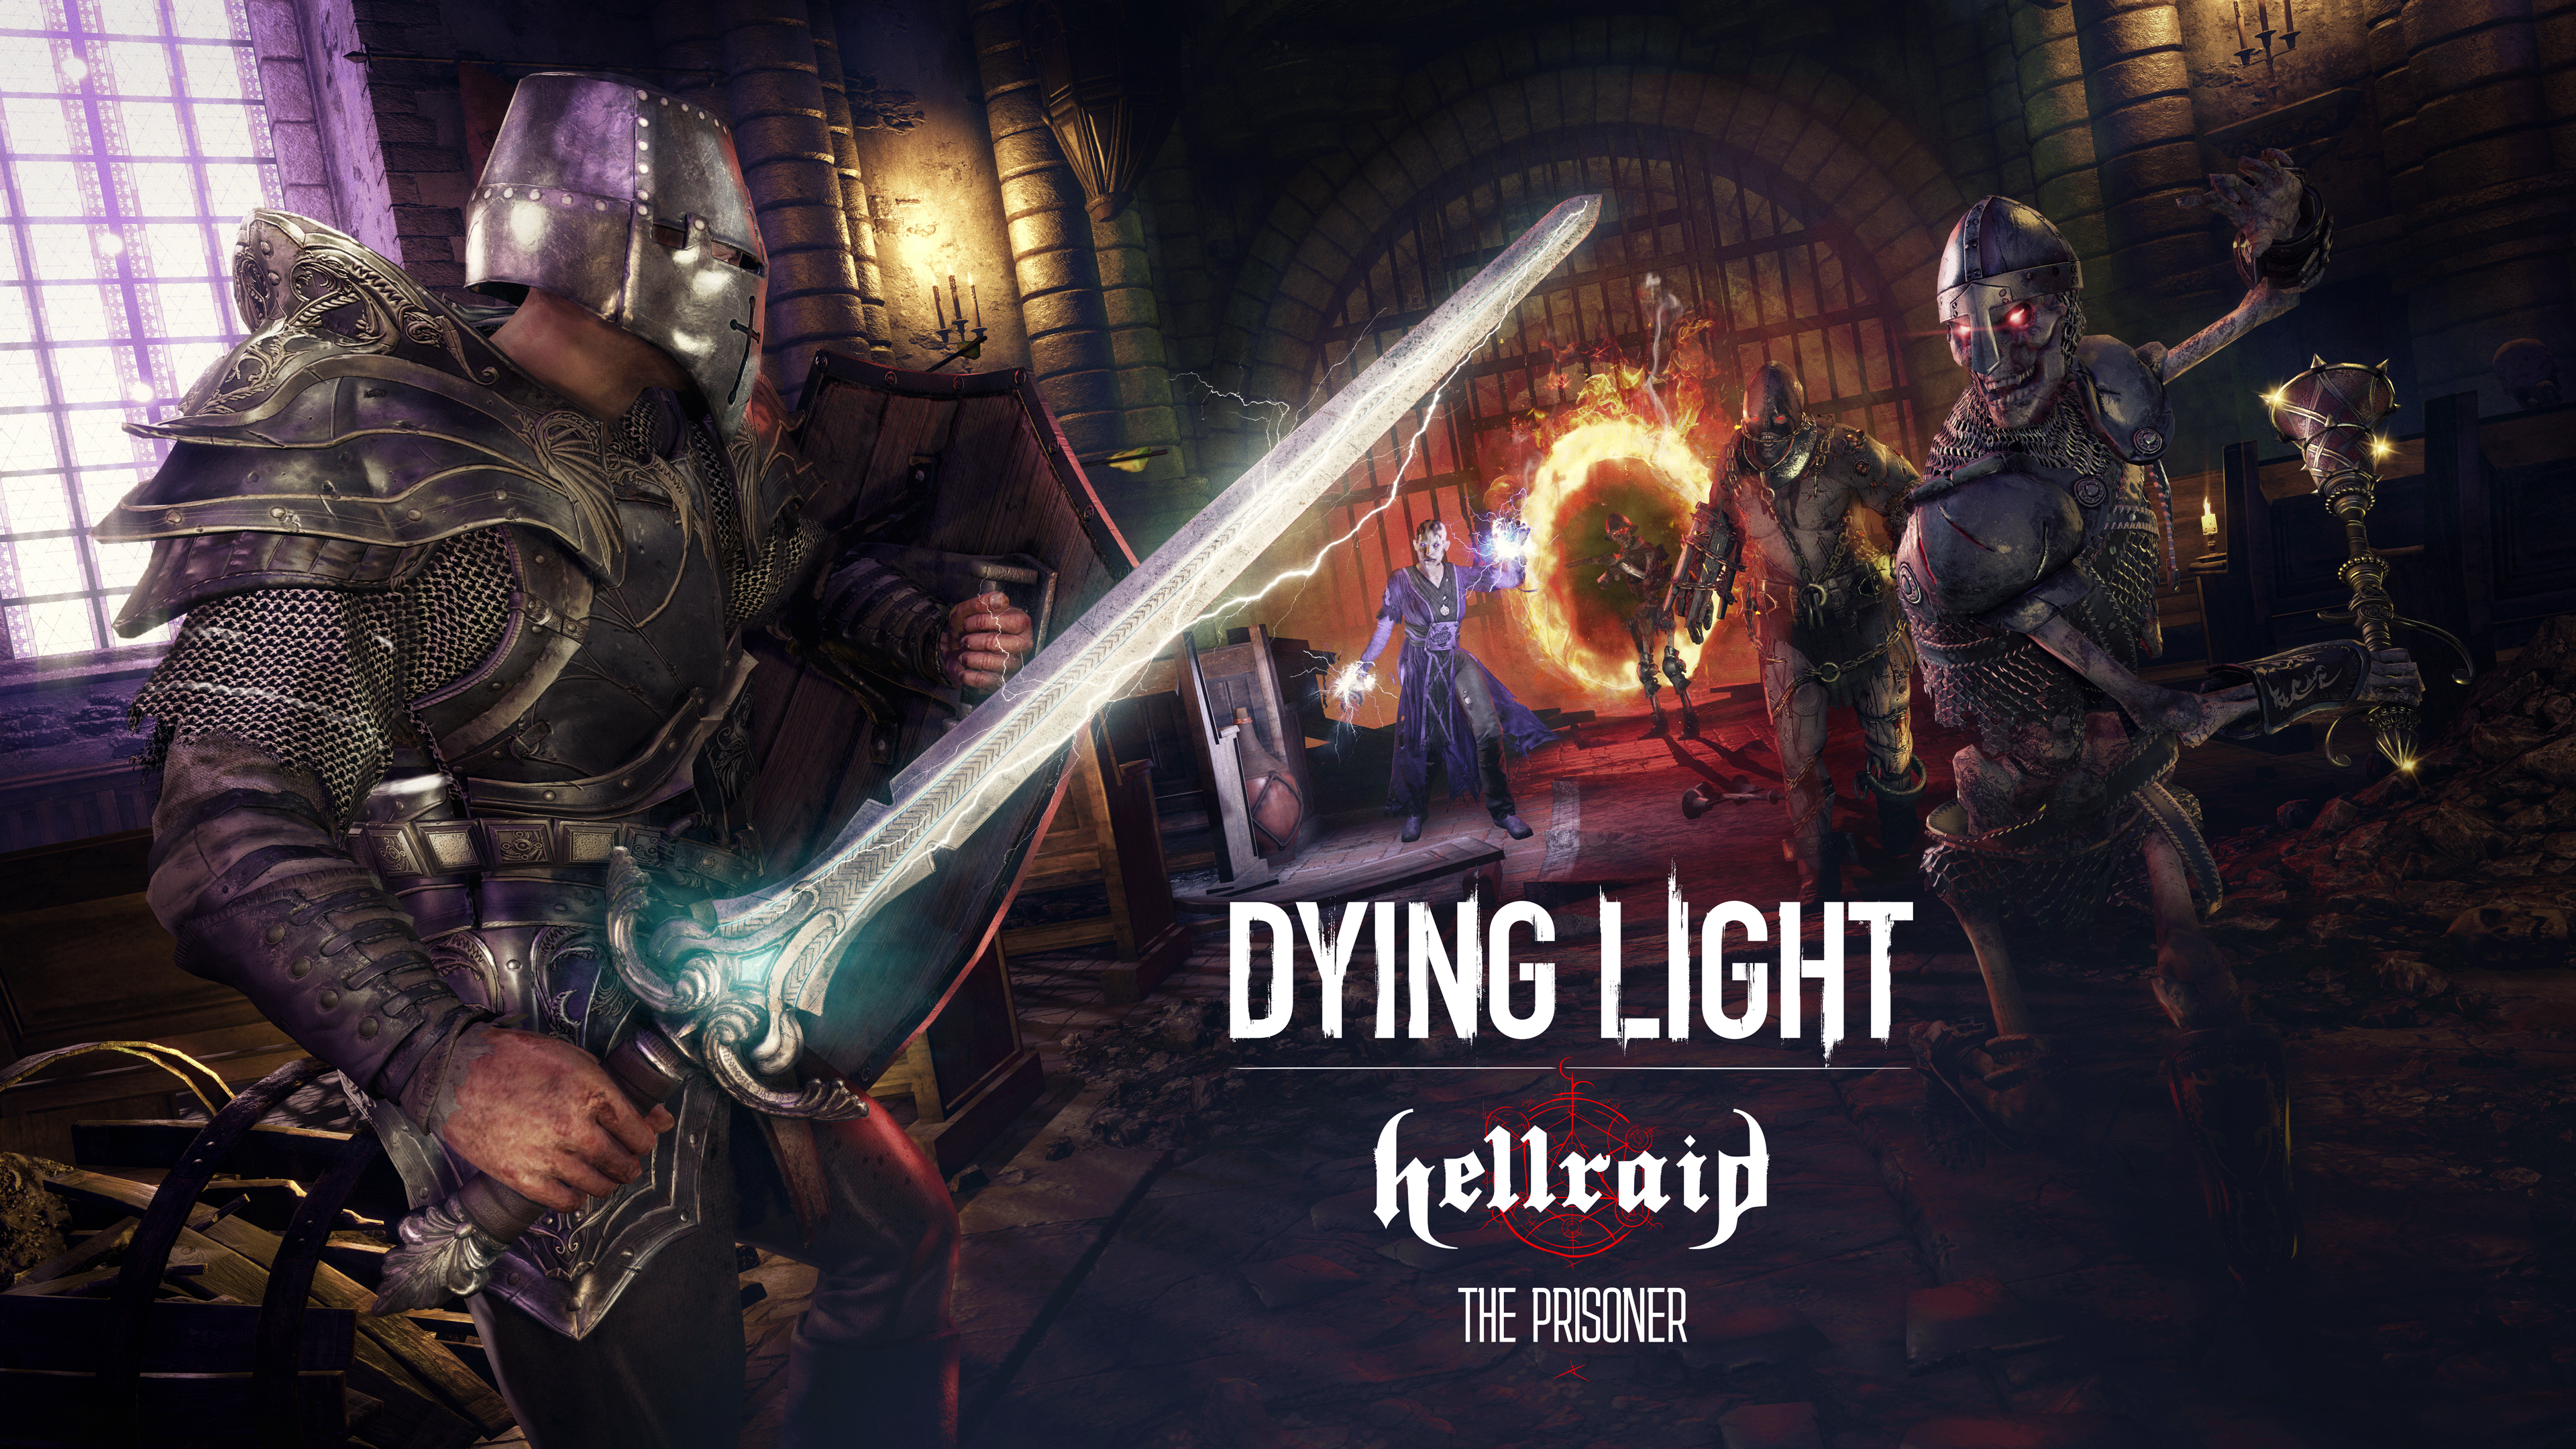 dying light, hellraid, expansion, dlc, update, story mode, techland, medieval, zombie, pc, slasher, xbox, xbox one, pc, playstation 4, ps4, sony, microsoft